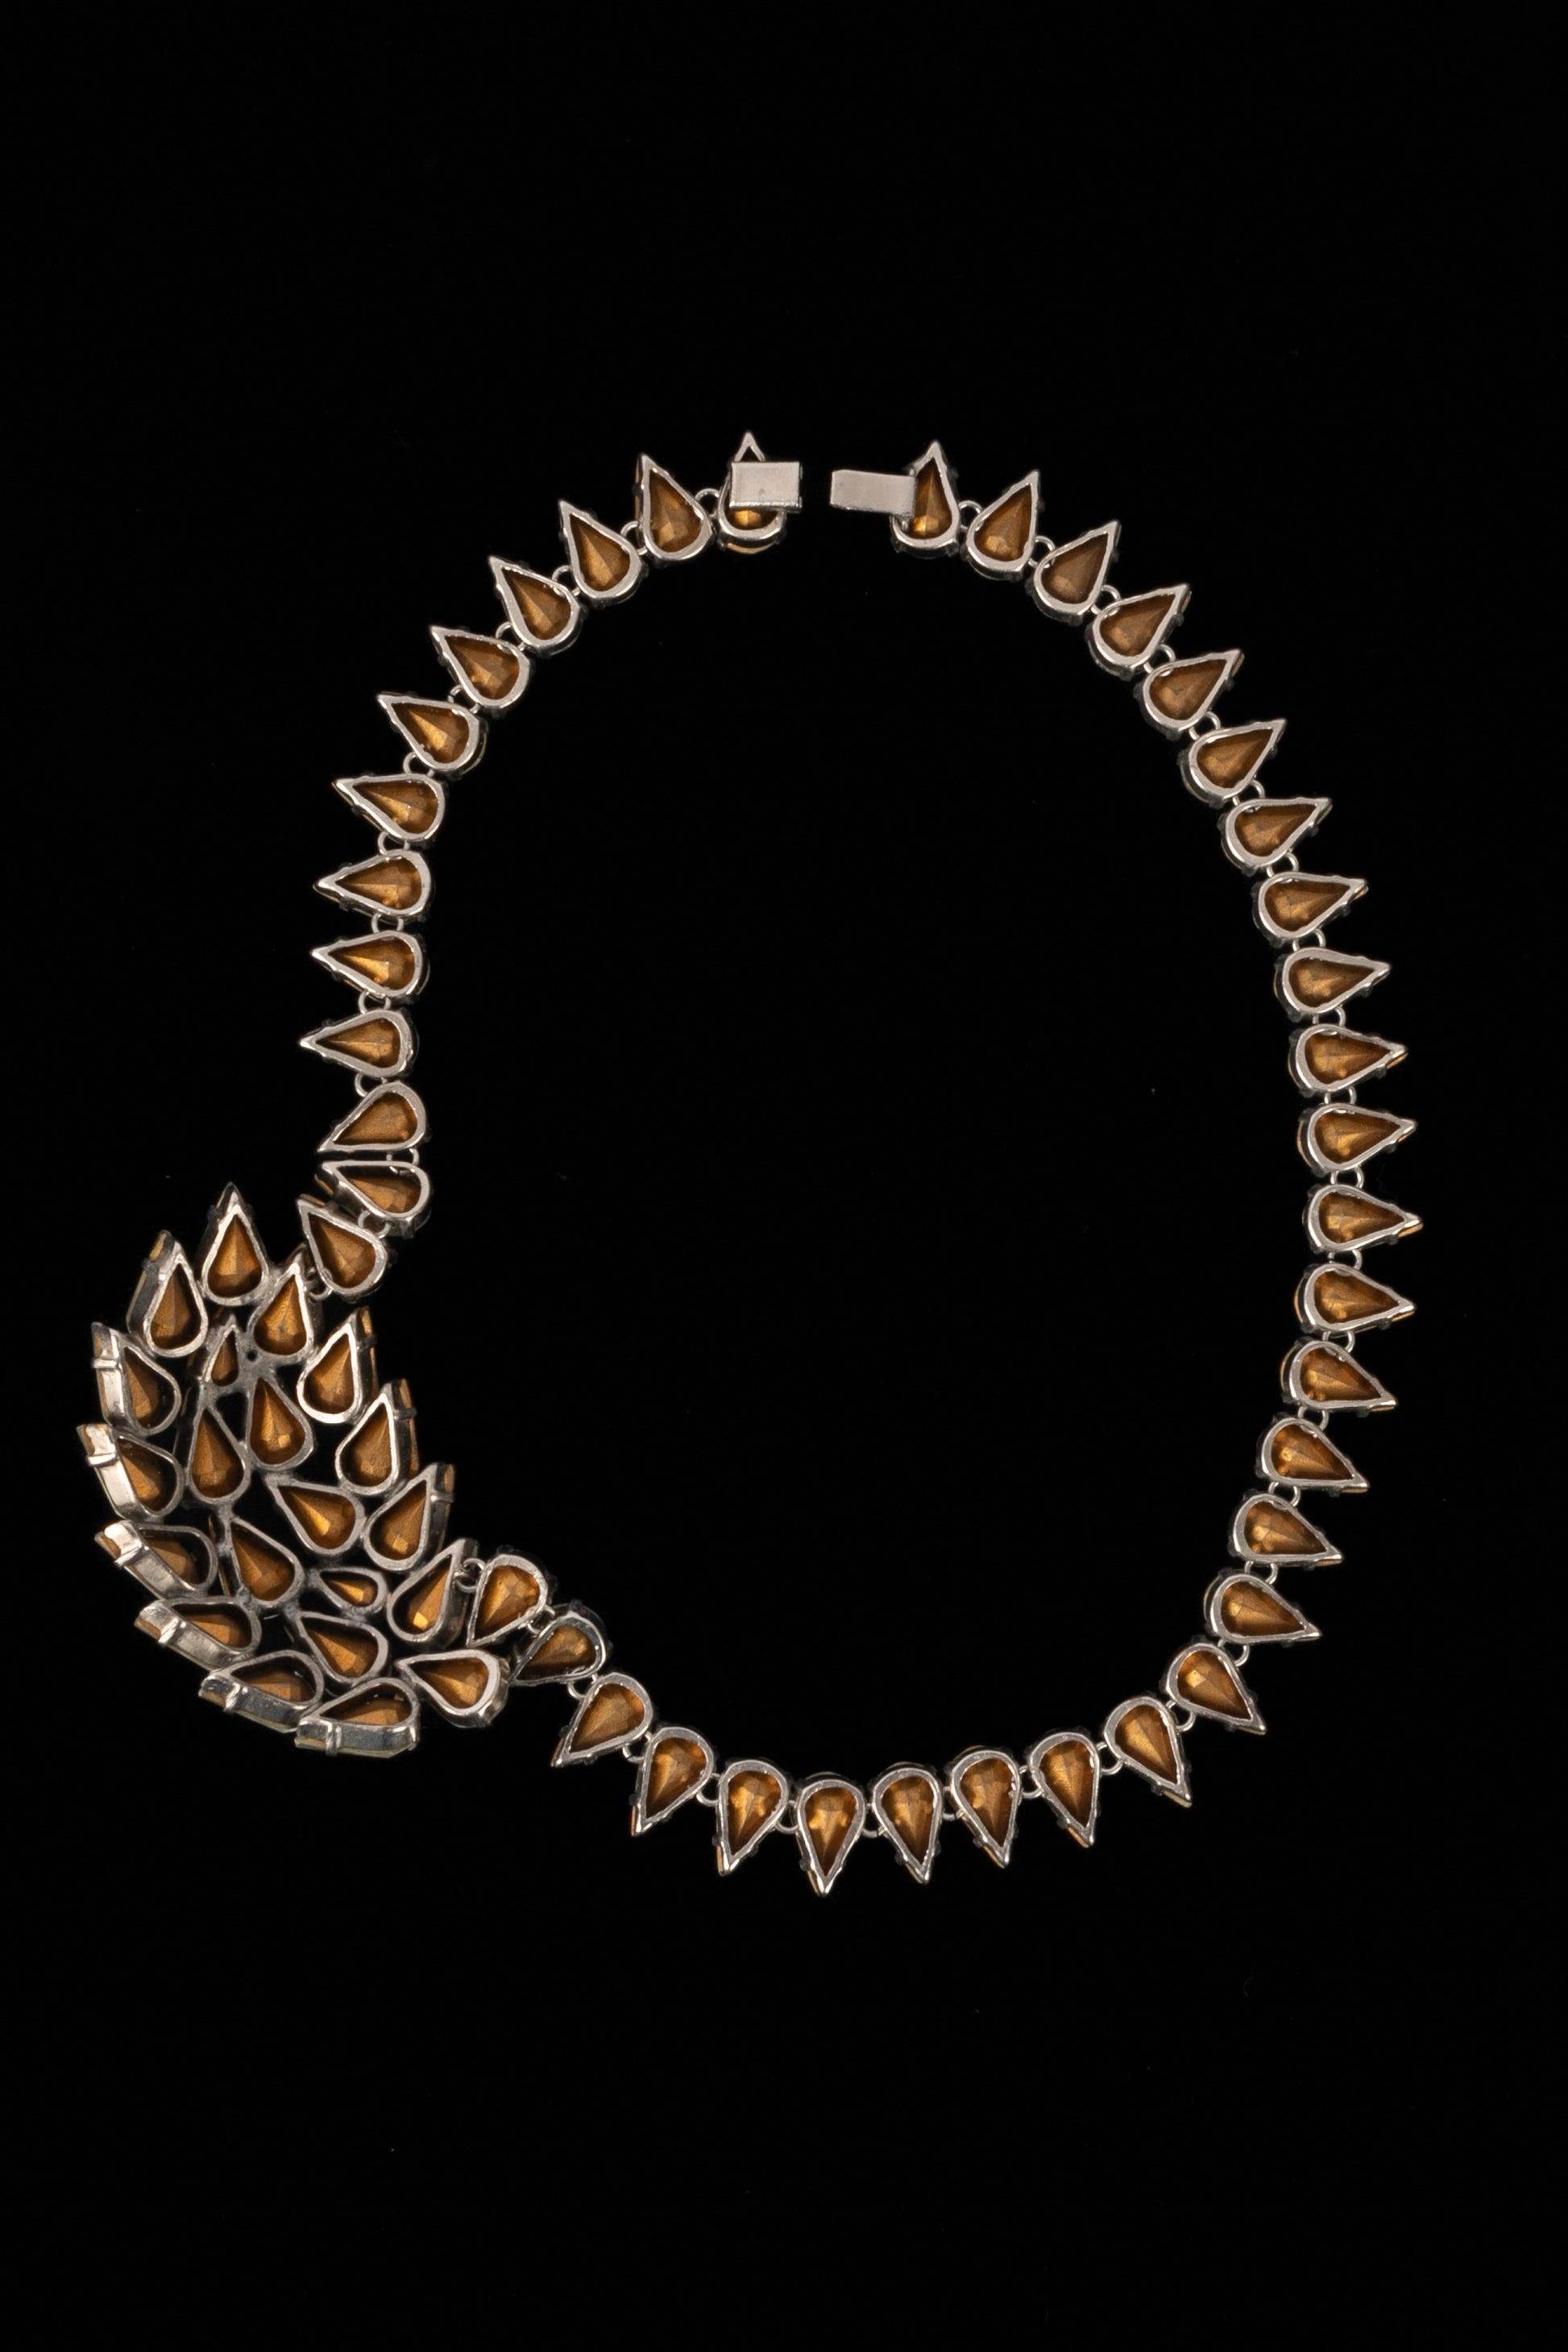 Unknwon - Silvery metal short necklace with rhinestones. Not signed.

Additional information: 
Condition: Very good condition
Dimensions: Length: 38 cm
 
Seller Reference: BC77